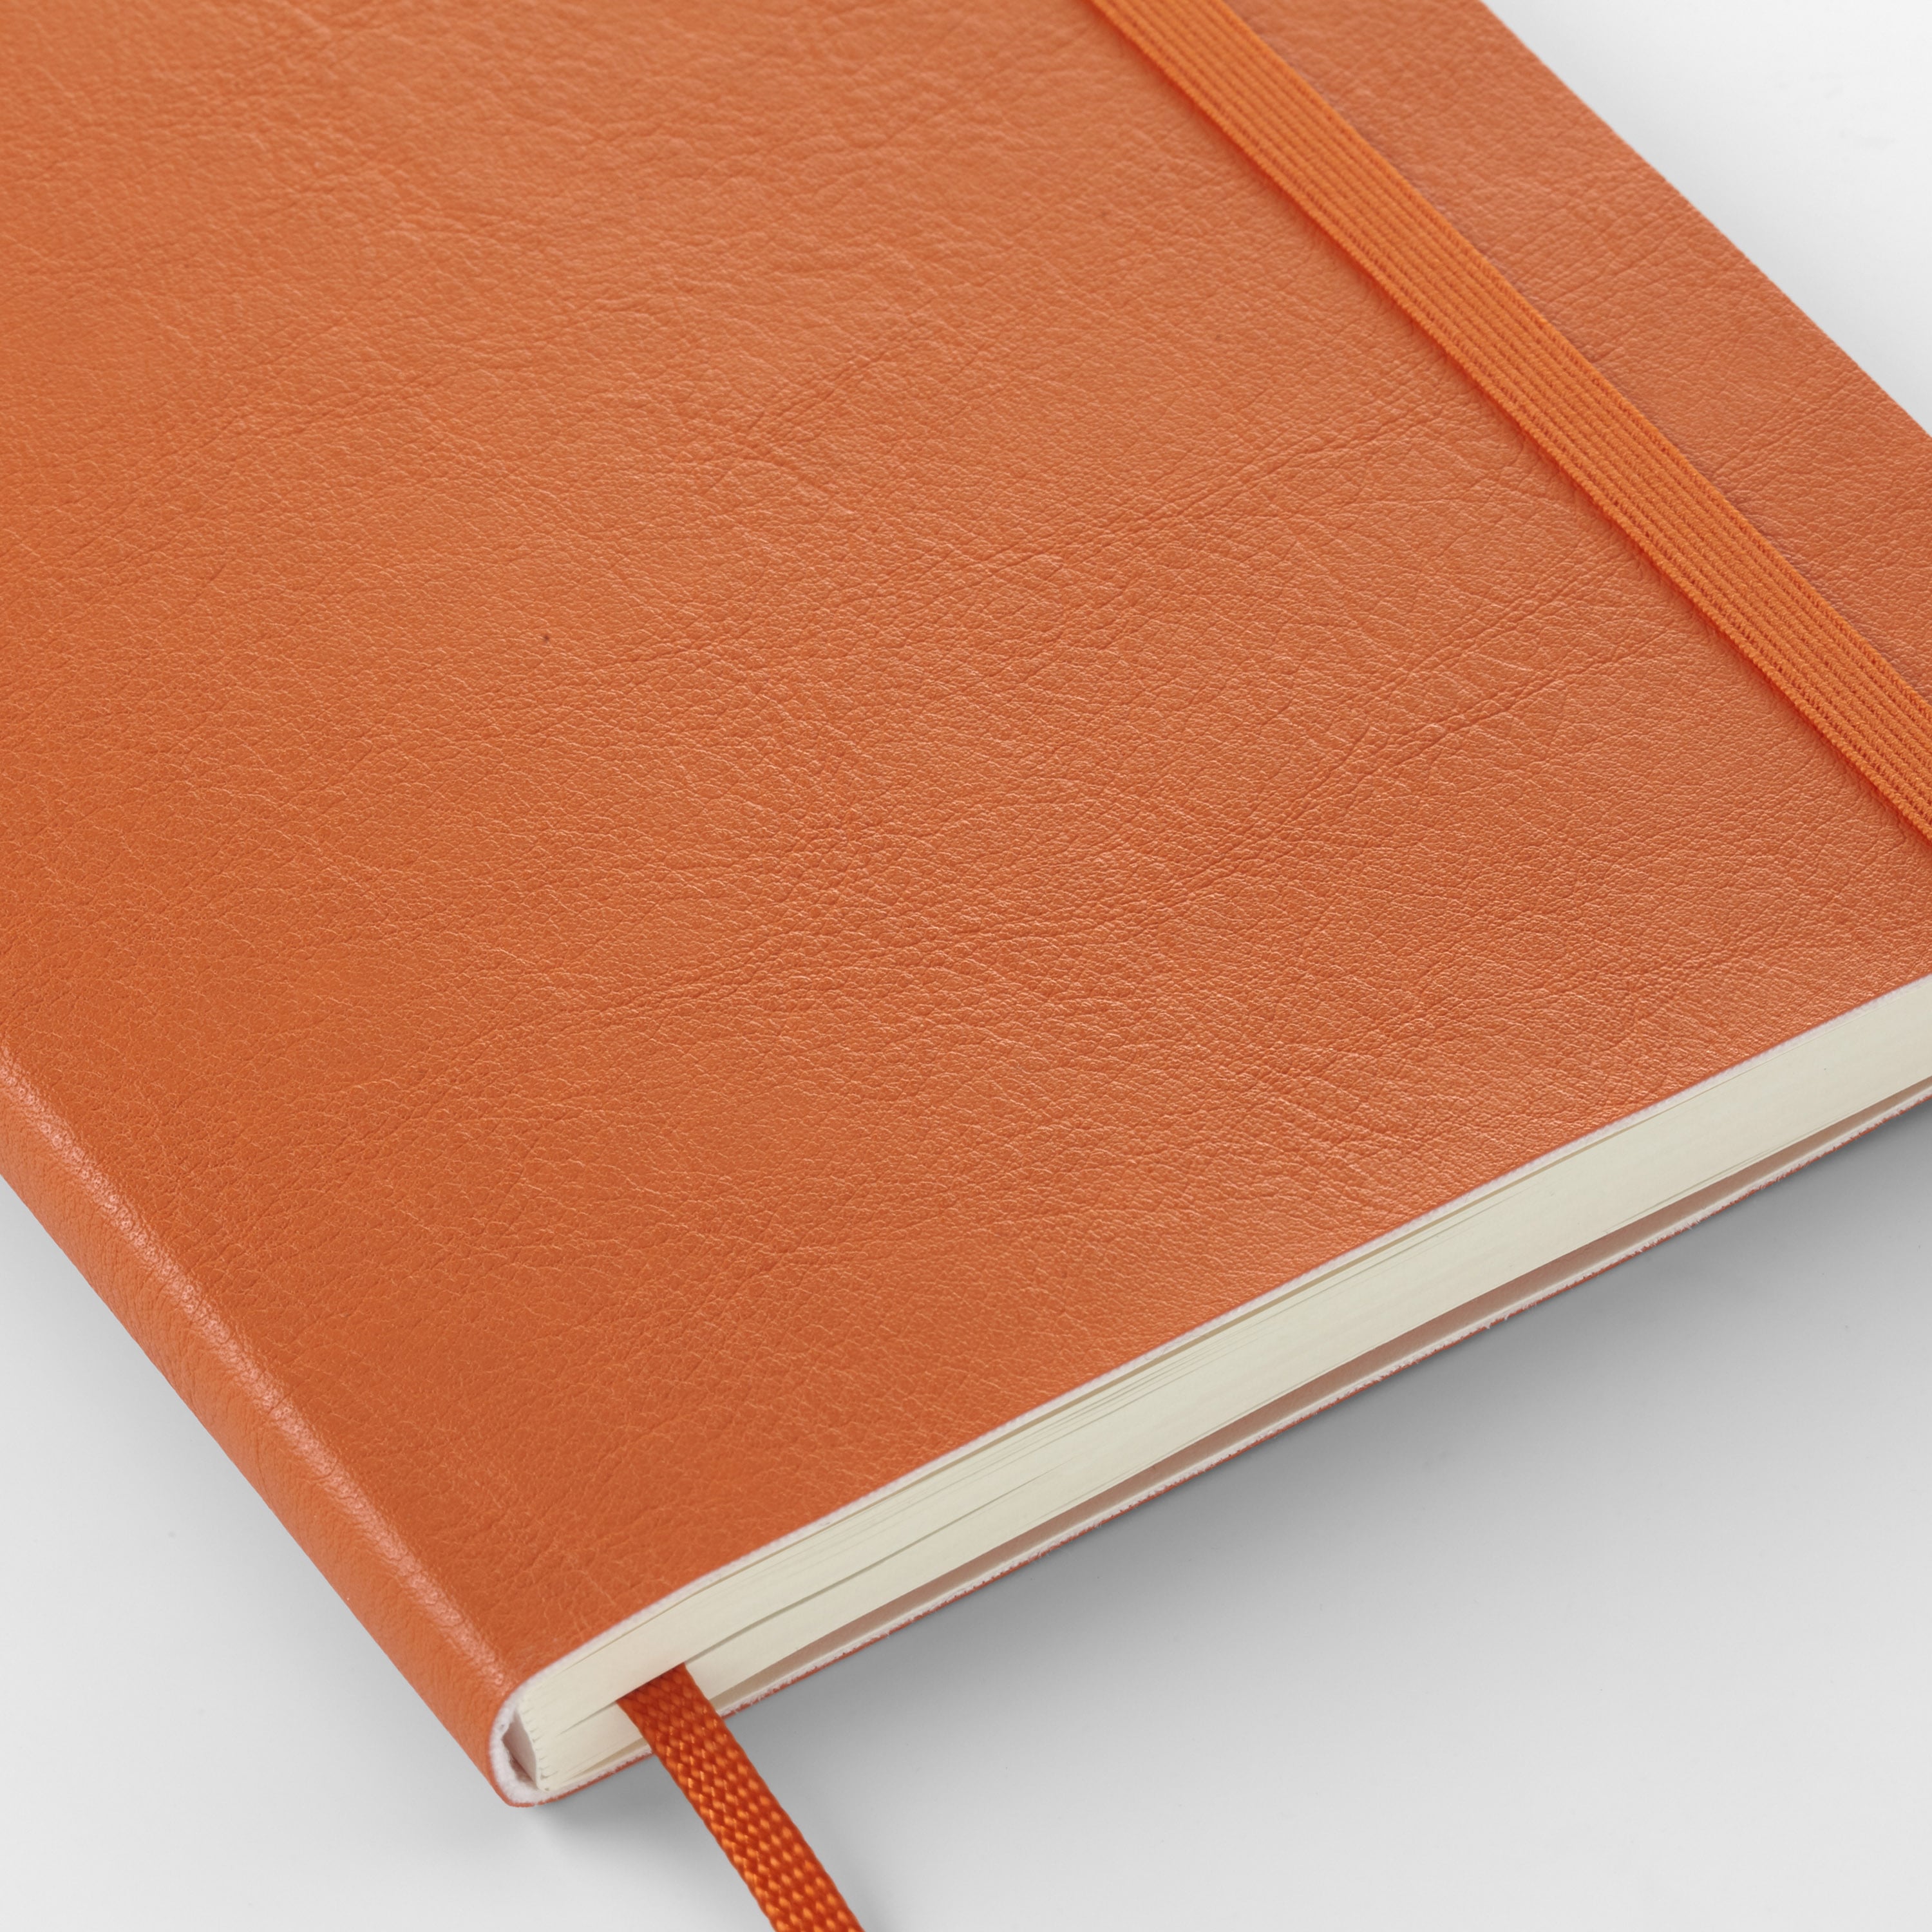 Grids & Guides softcover: Two notebooks for visual thinkers